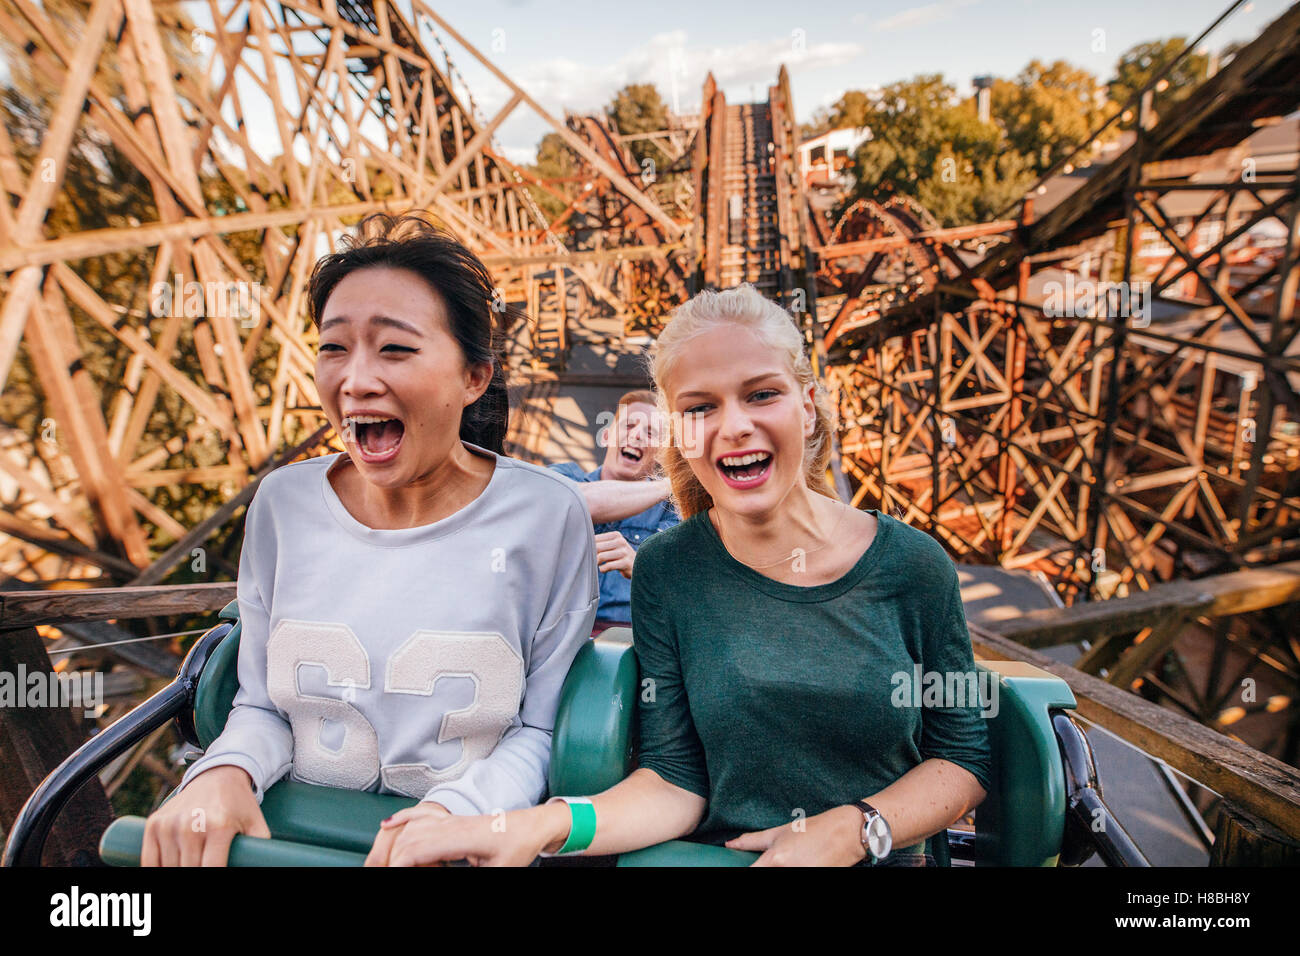 Shot of young friends riding roller coaster ride at amusement park. Young people having fun at amusement park. Stock Photo